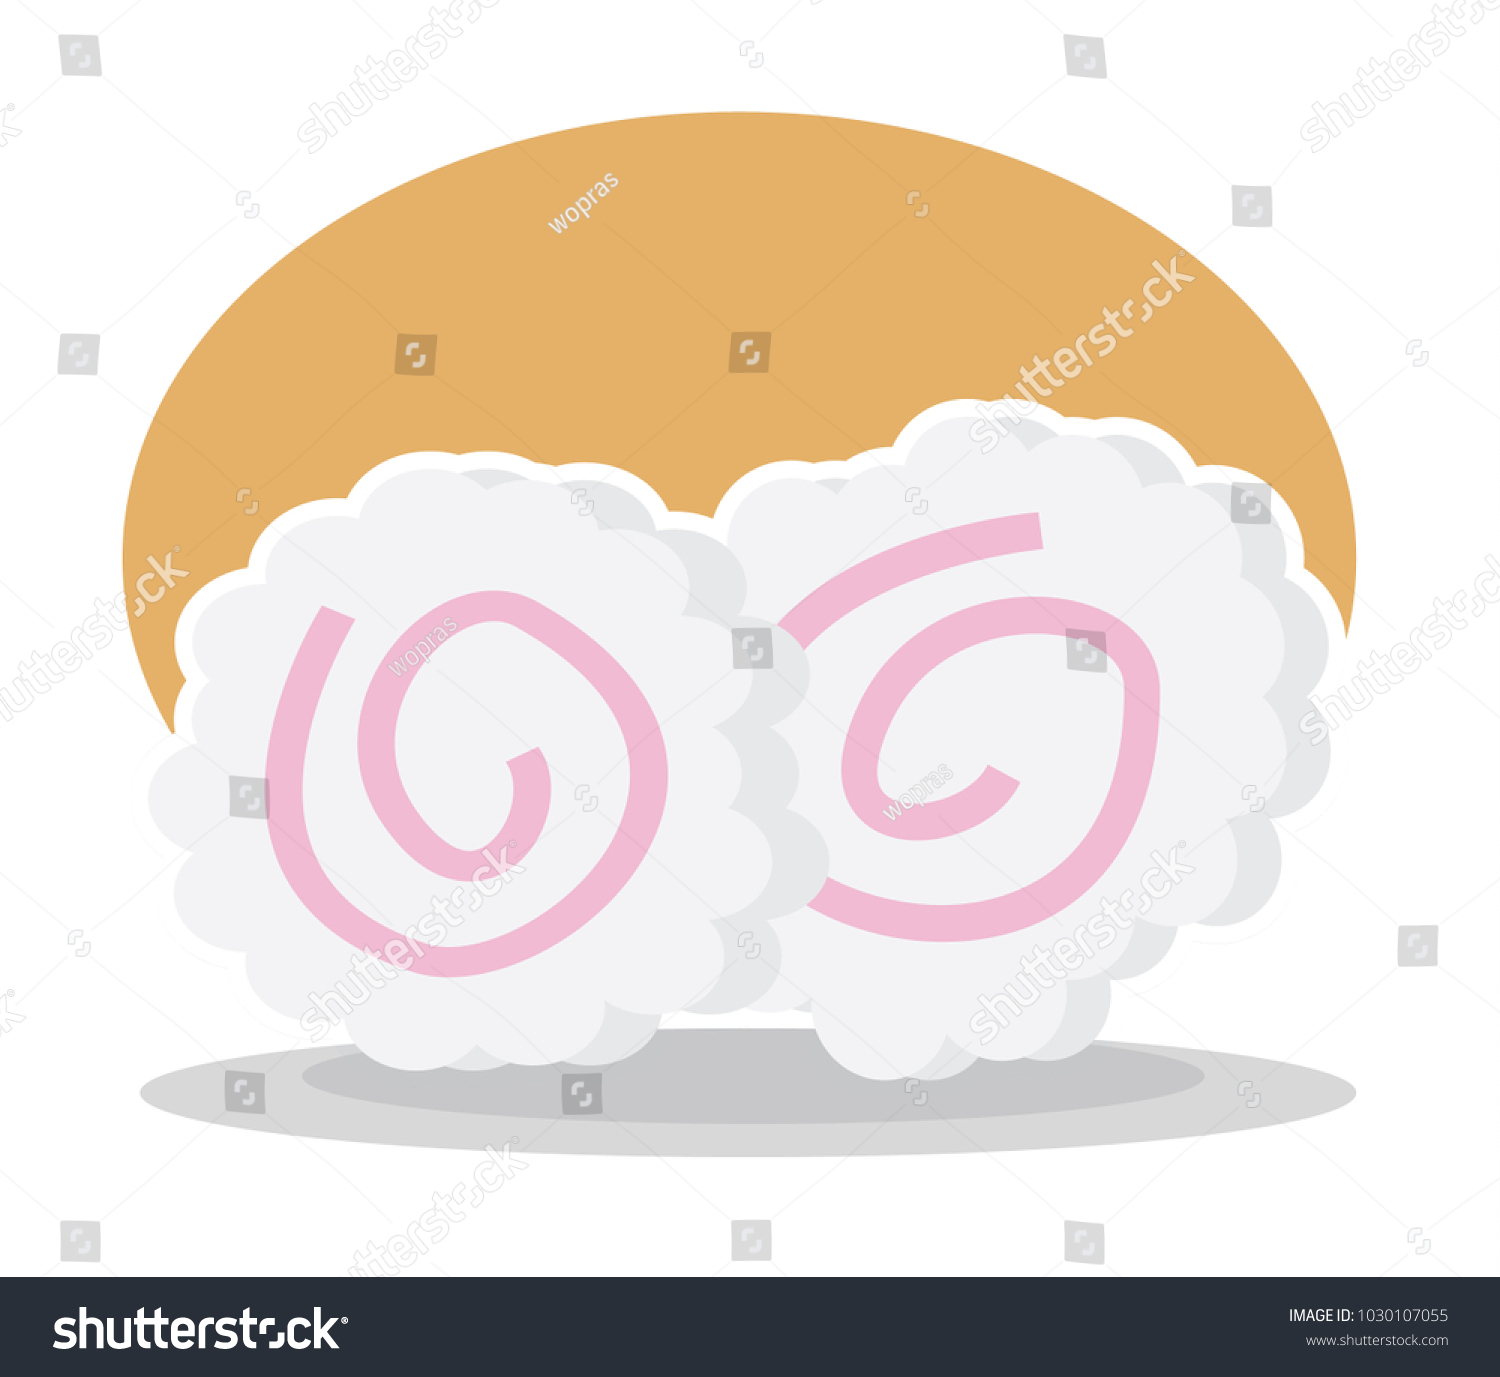 SVG of simple design of two naruto ramen japanese food with circle background svg